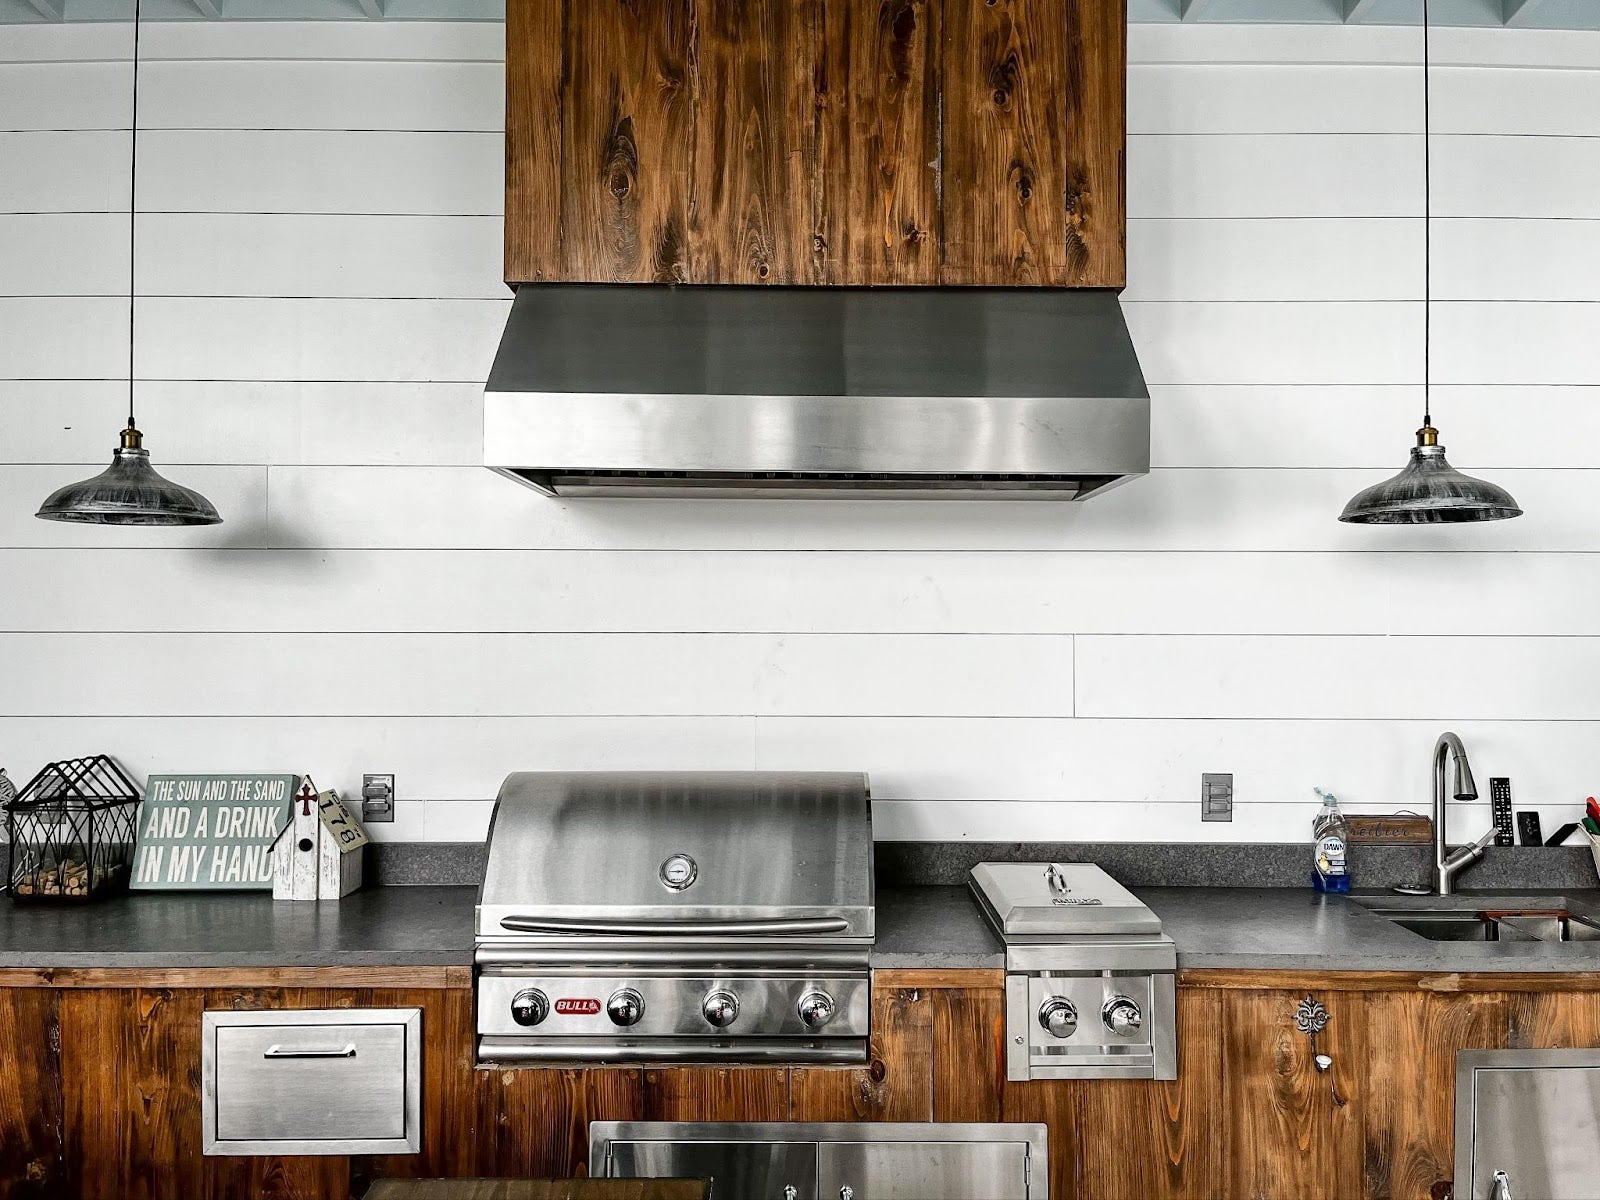 Outdoor kitchen blending rustic charm with modern functionality, featuring a Proline range hood and wooden cabinetry against a white shiplap wall - prolinerangehoods.com